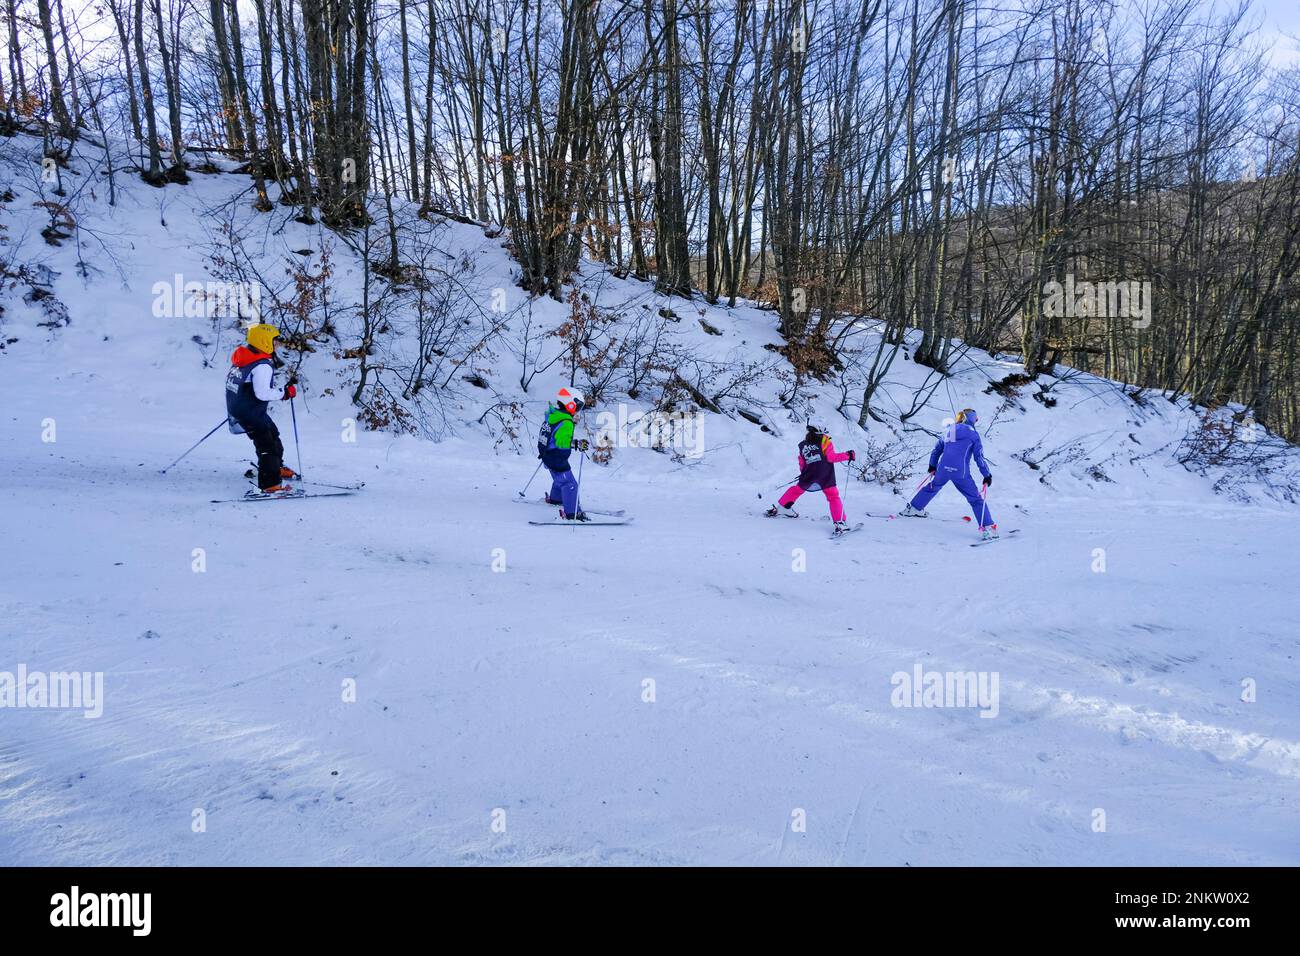 Kids in colorful ski suits skiing in the snowy mountains across the trees and sunlight. Stock Photo